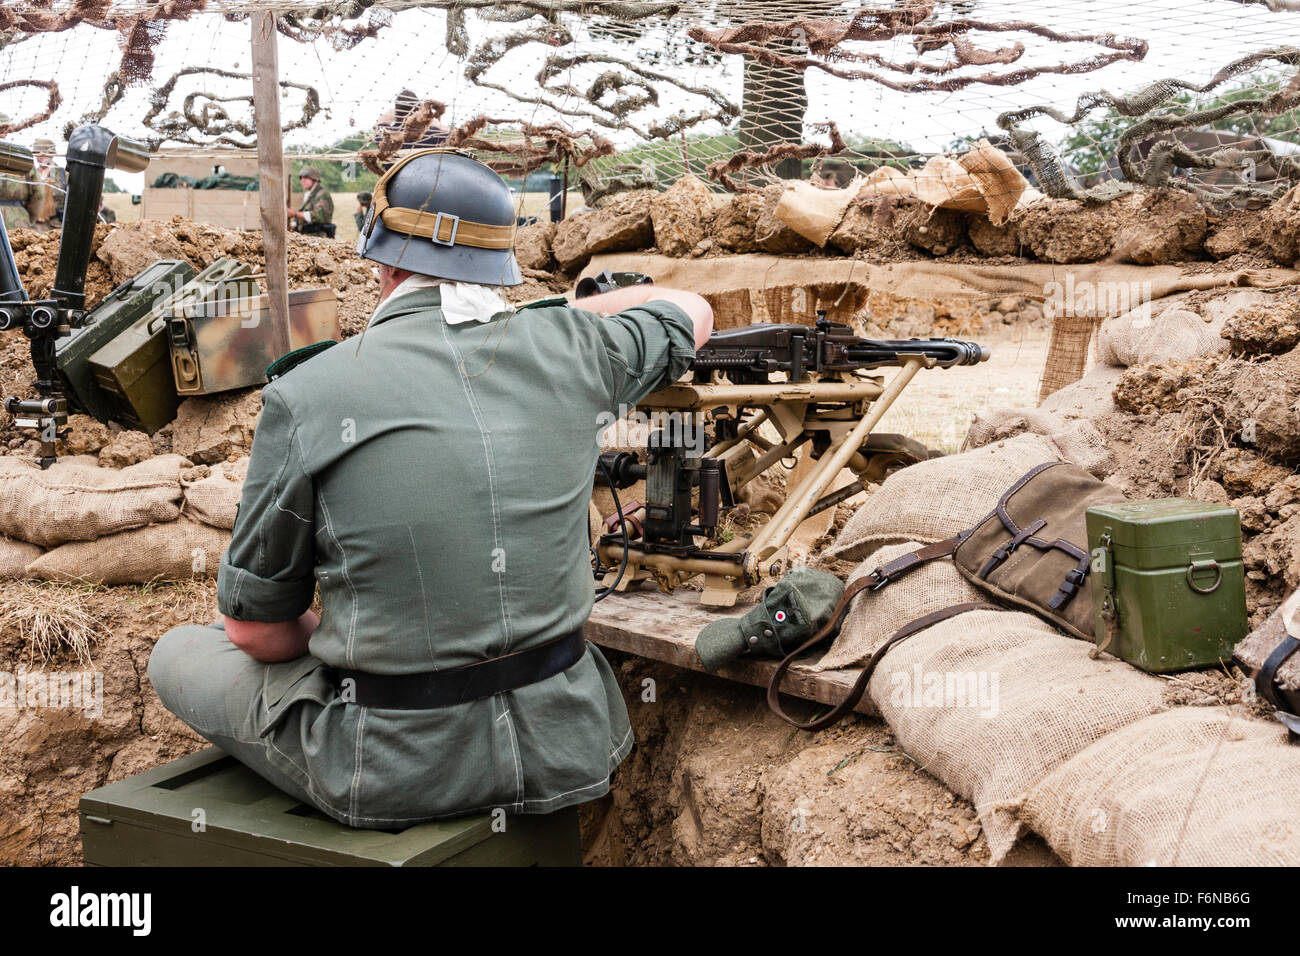 World war two re-enactment. German solider sitting, with back to viewer, in sandbagged trench manning MG42 machine gun under camouflage netting. Stock Photo